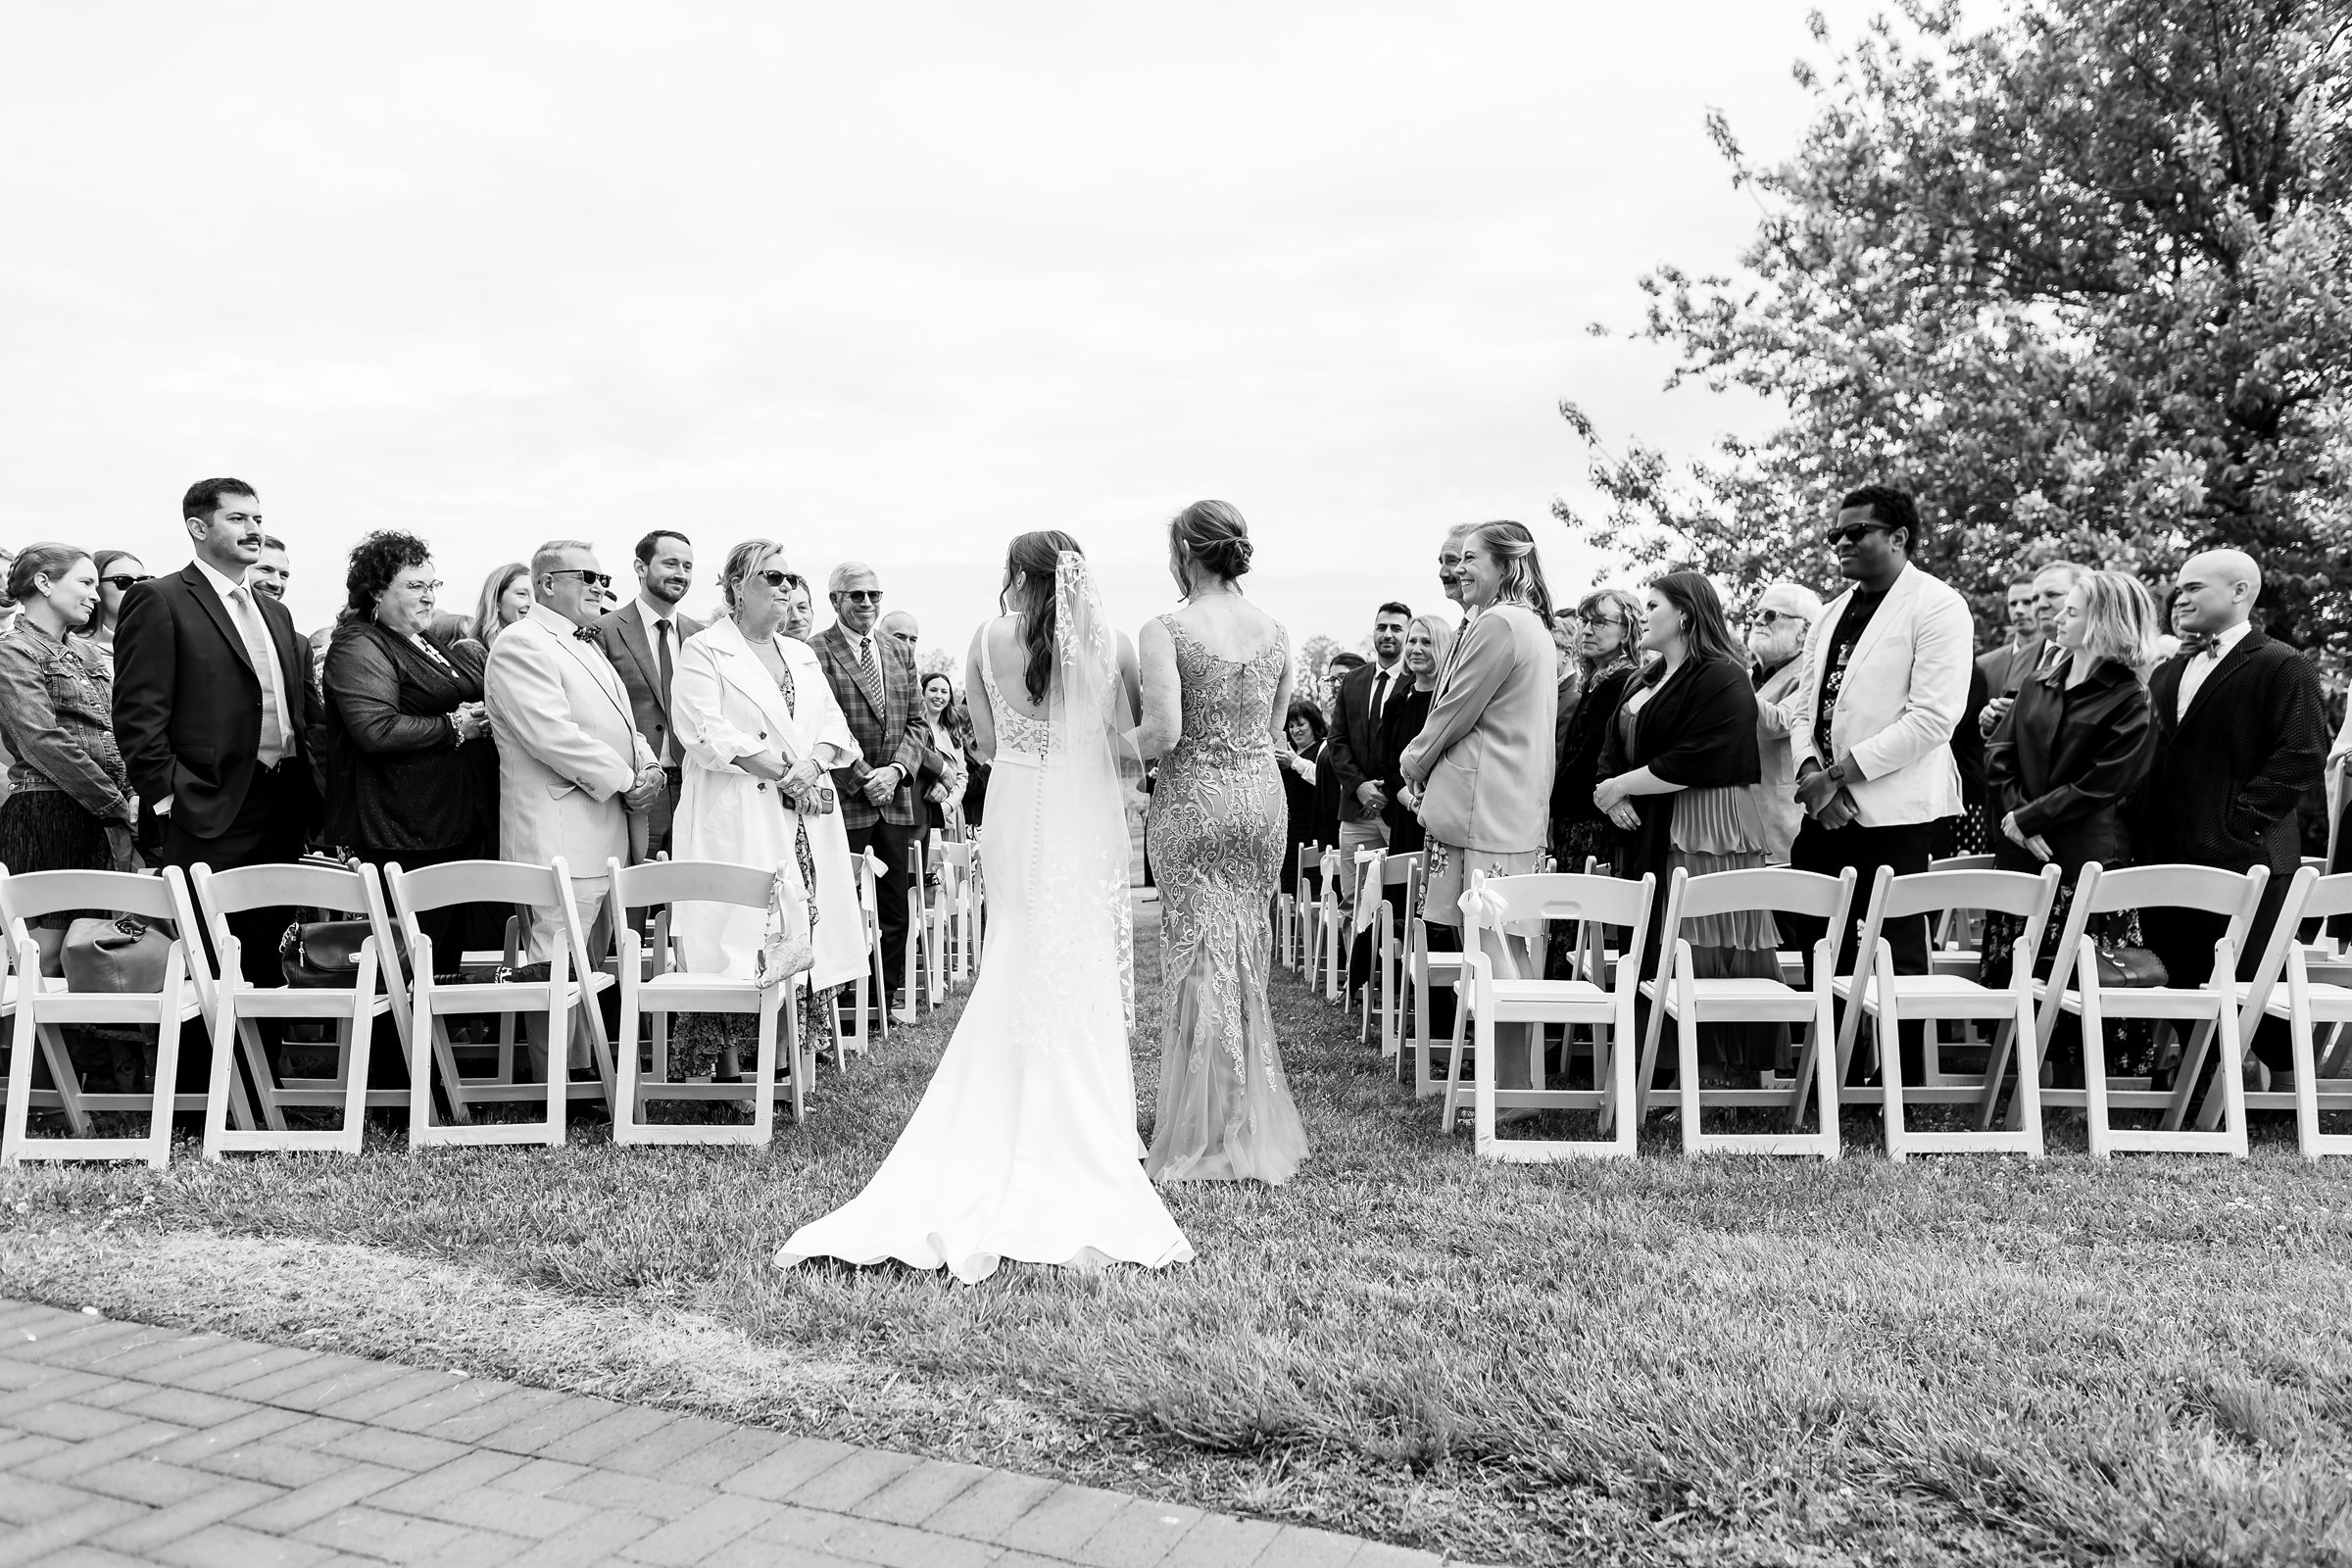 Black and white photo of a bride and another woman walking down an outdoor aisle. Guests are standing and watching, with trees and a cloudy sky in the background.